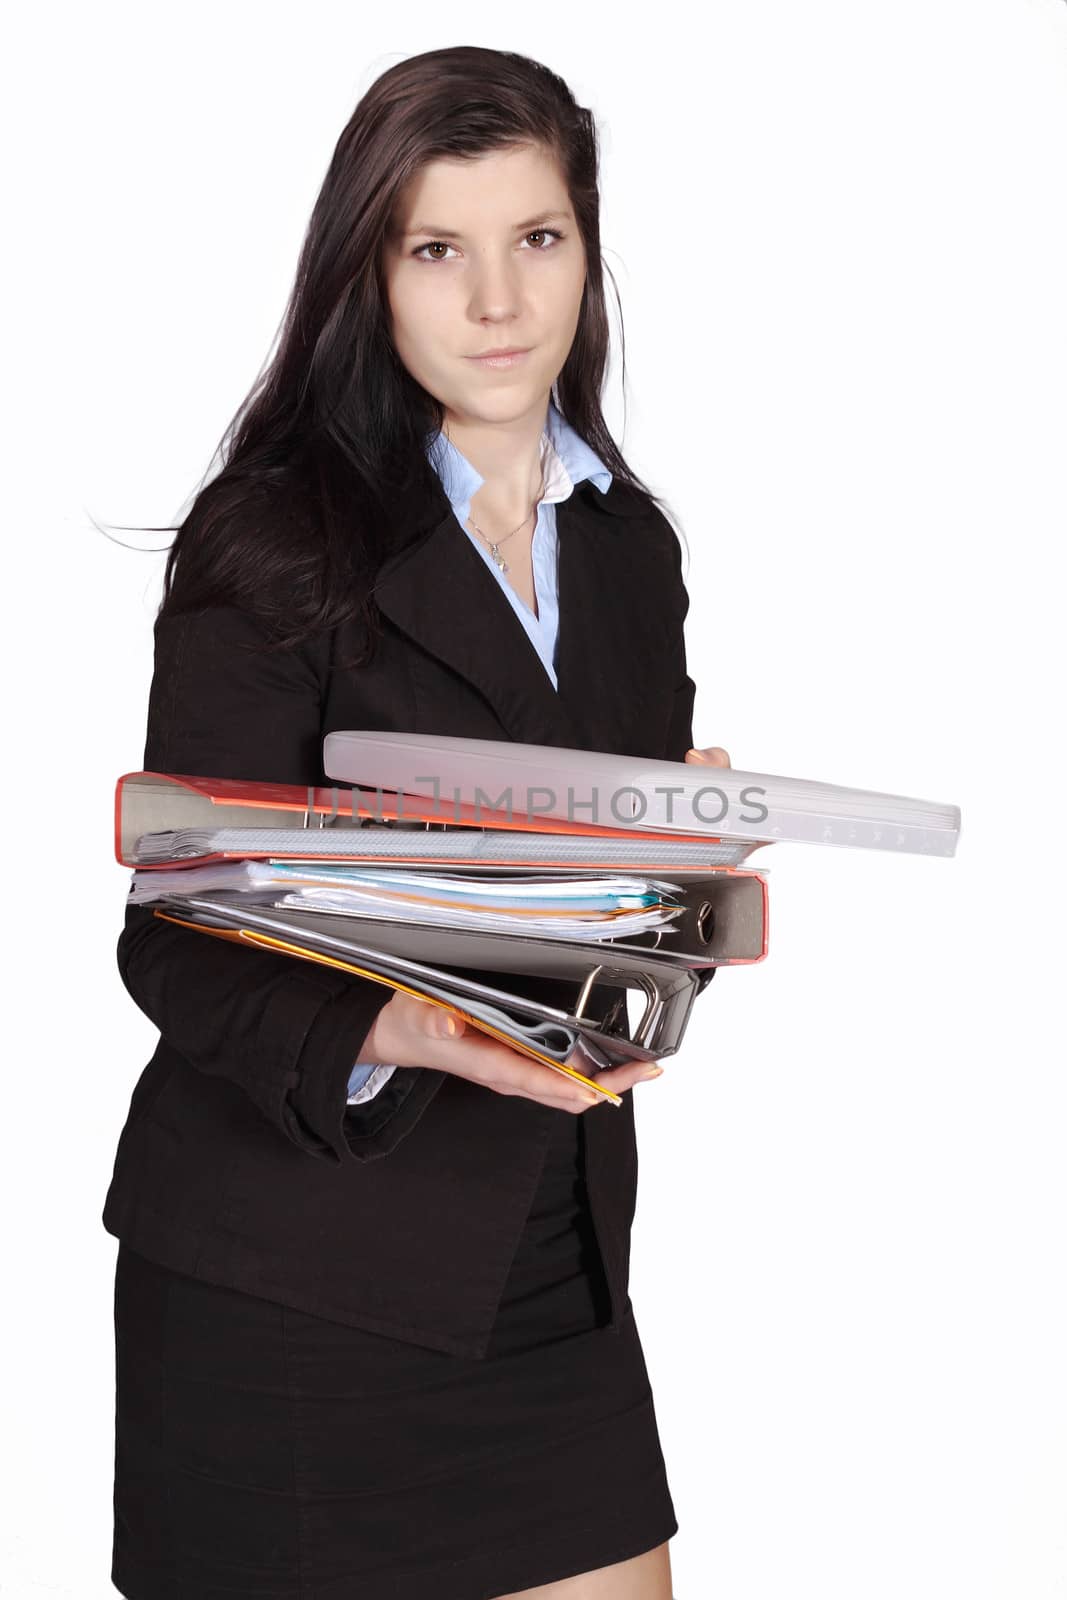 Woman in a jacket holding a pile of documents, isolated on white background